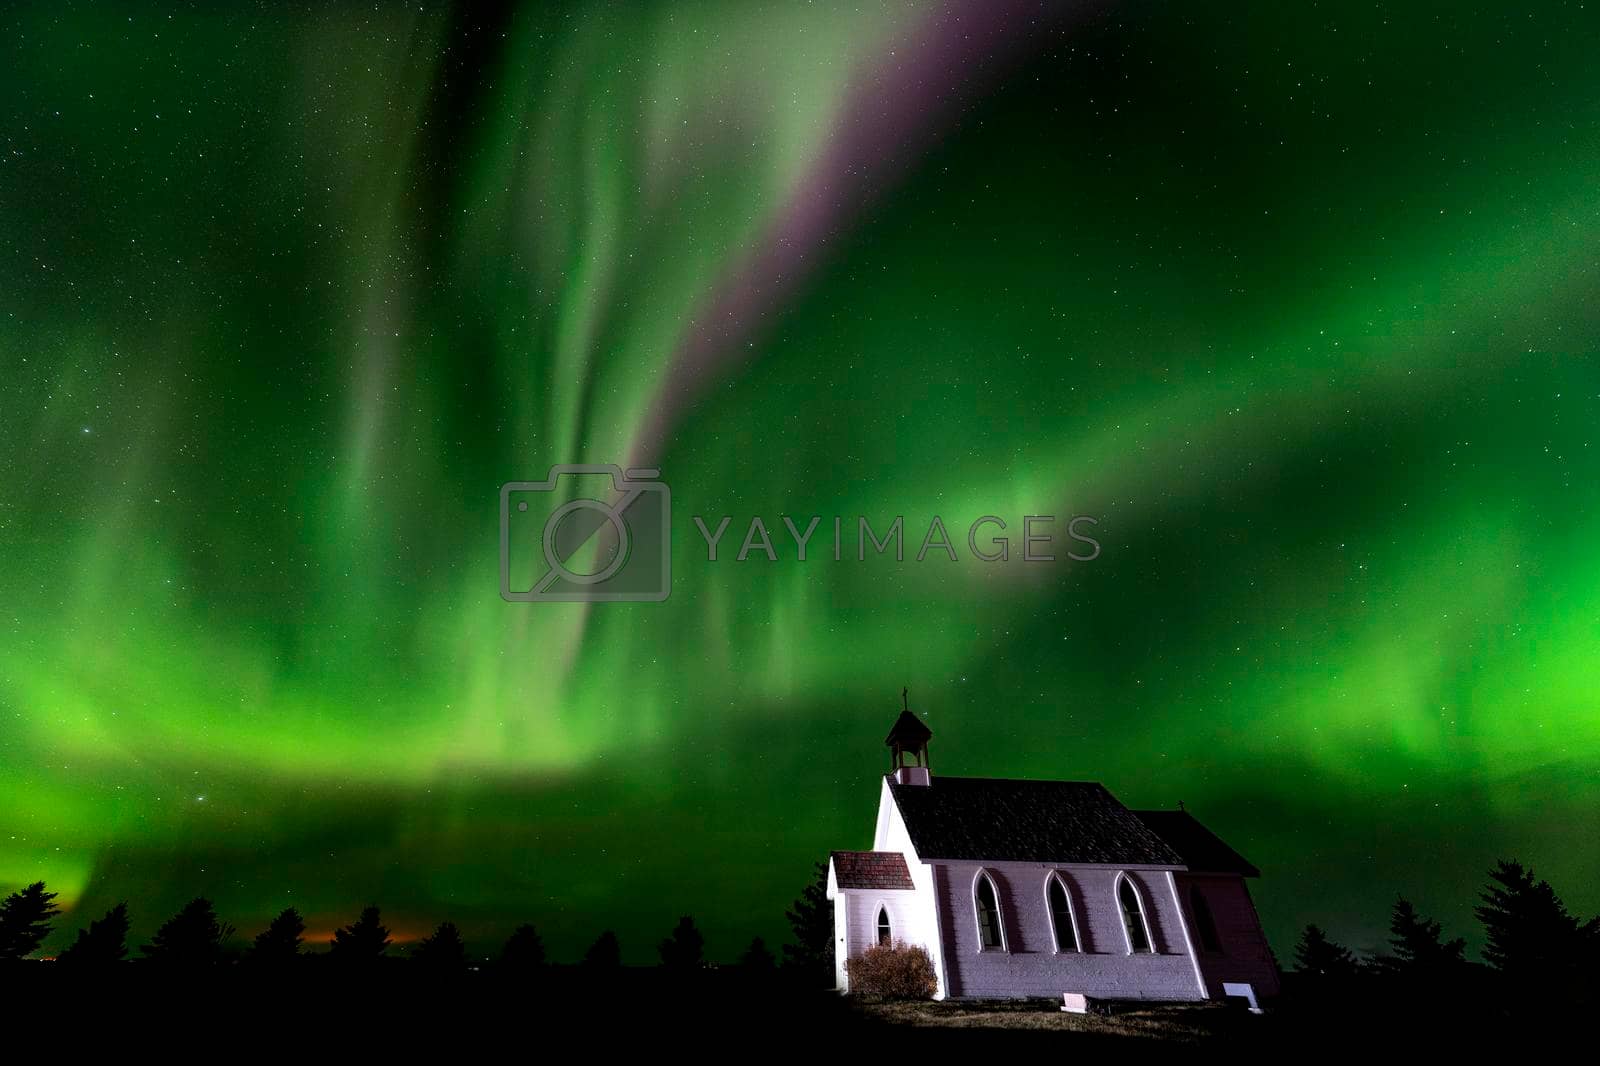 Royalty free image of Northern Lights Canada by pictureguy